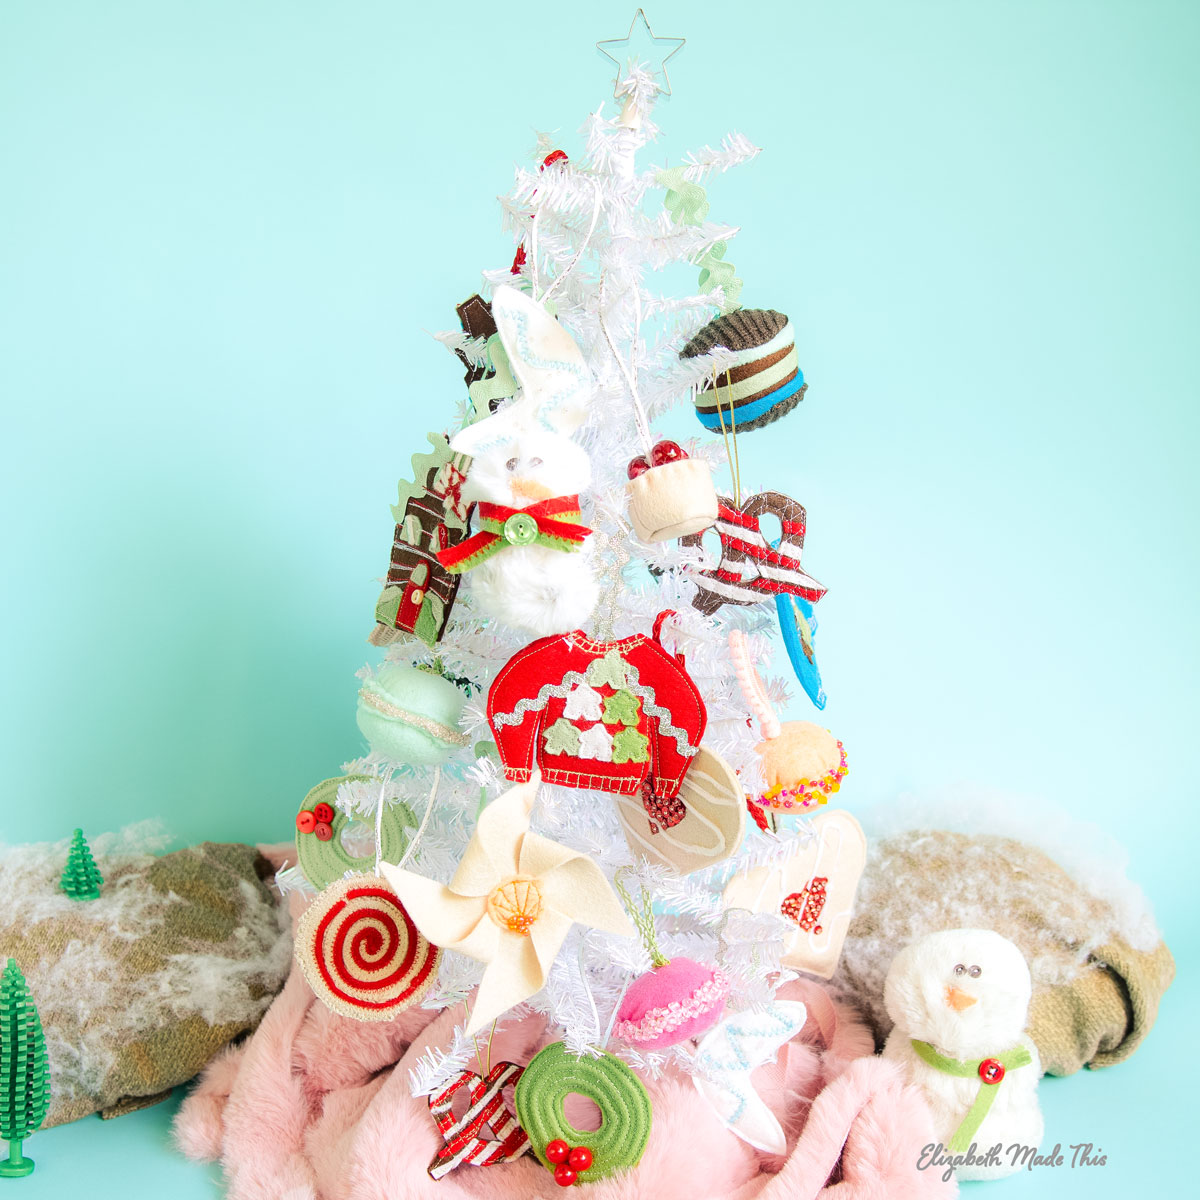 edible looking ornaments on a white tree and blue background